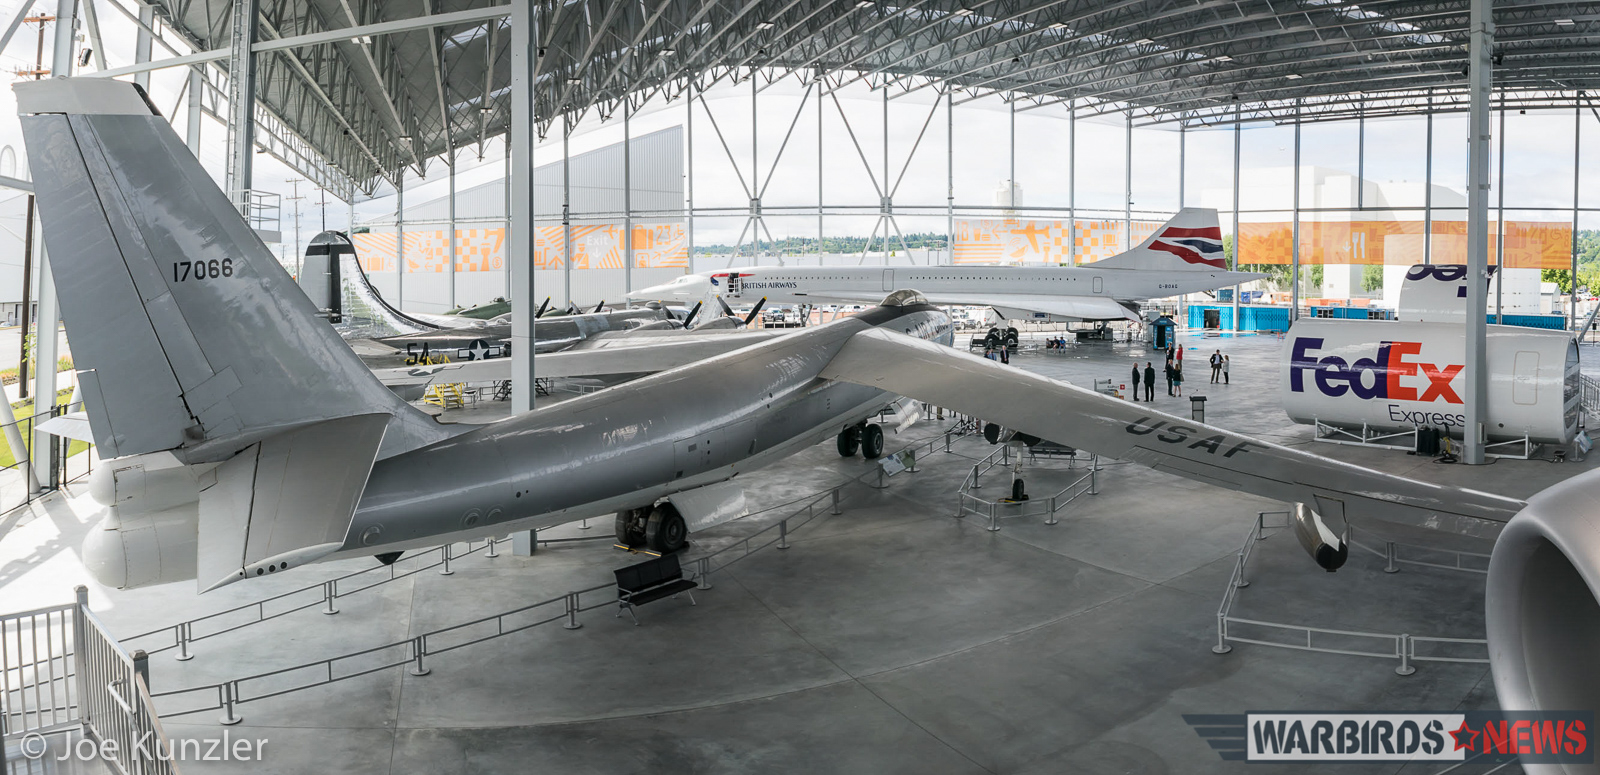 A panoramic view of the Museum of Flight Aviation Pavilion showing the Boeing B-47 in the foreground. (photo by Joe Kunzler)